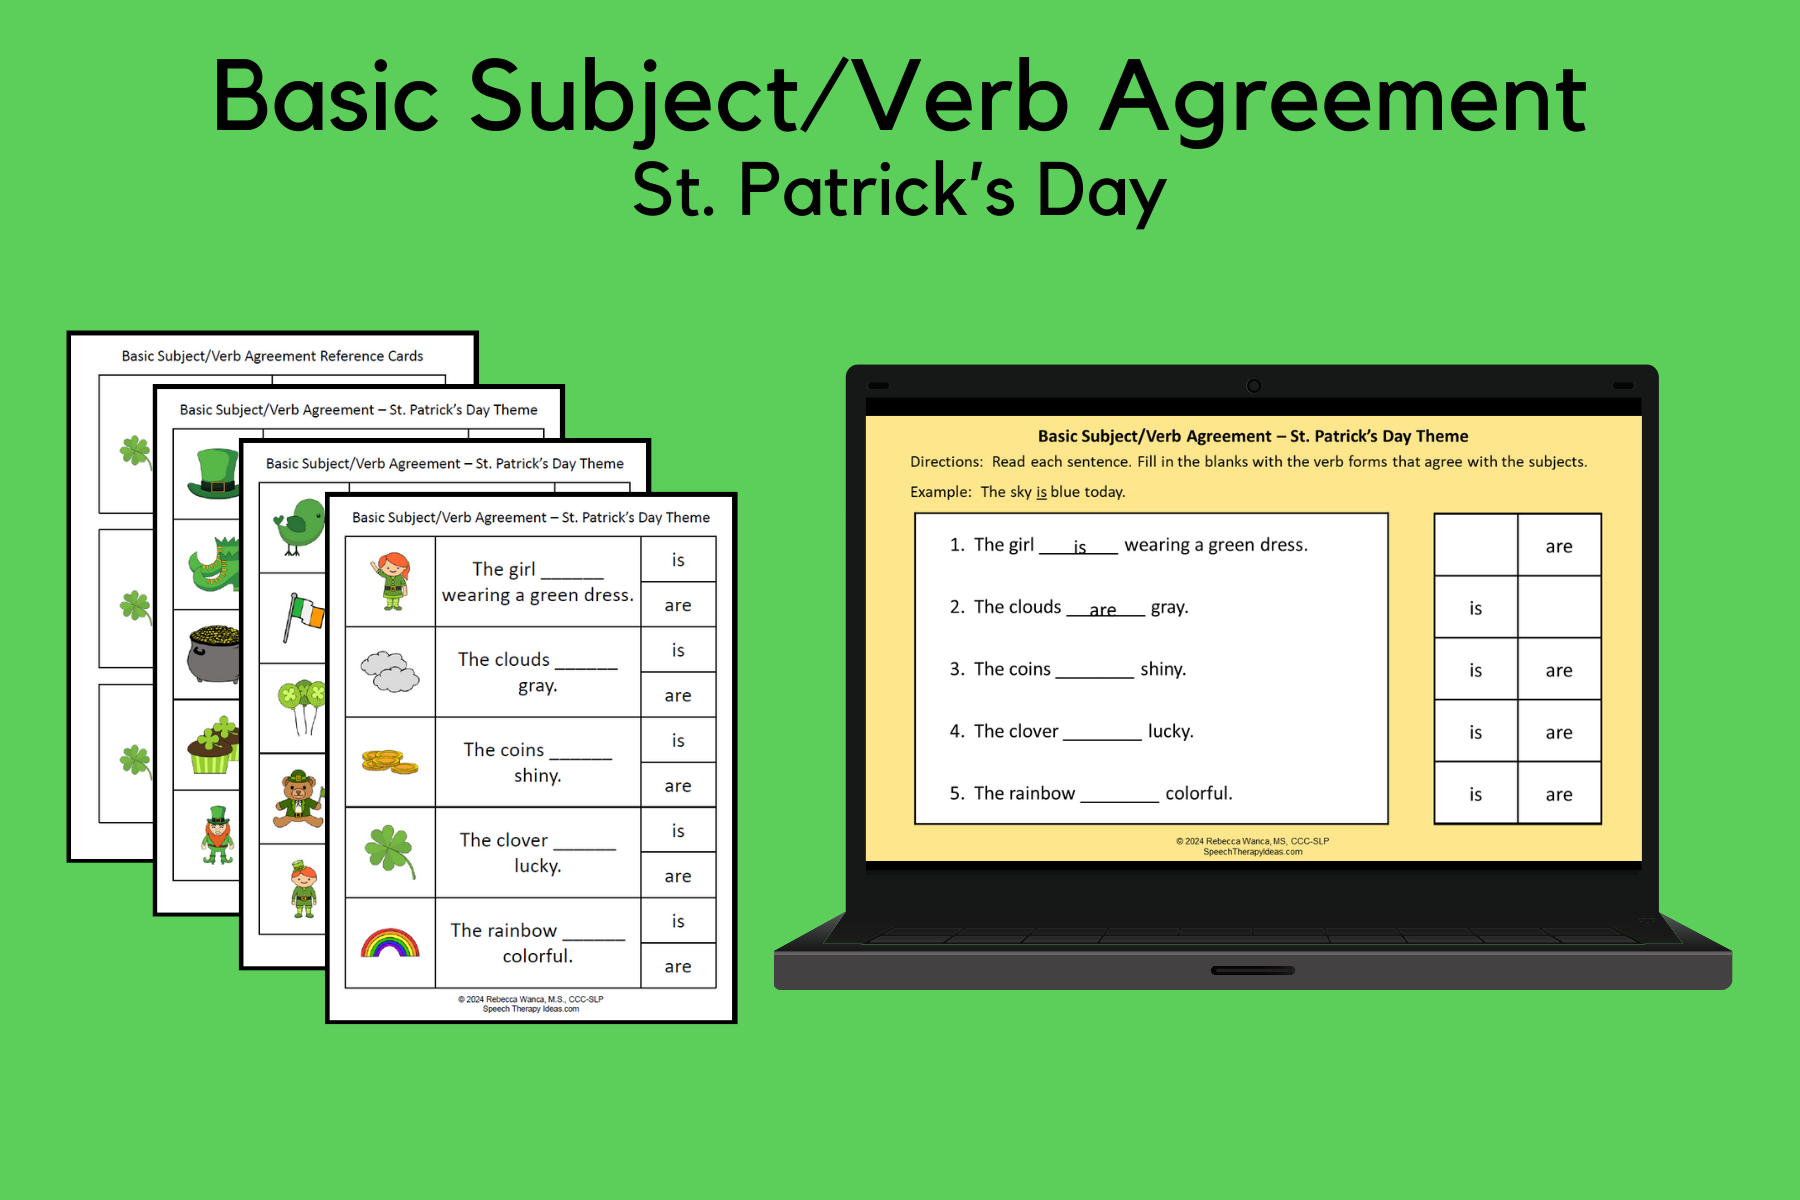 Basic Subject & Verb Agreement – St. Patrick’s Day